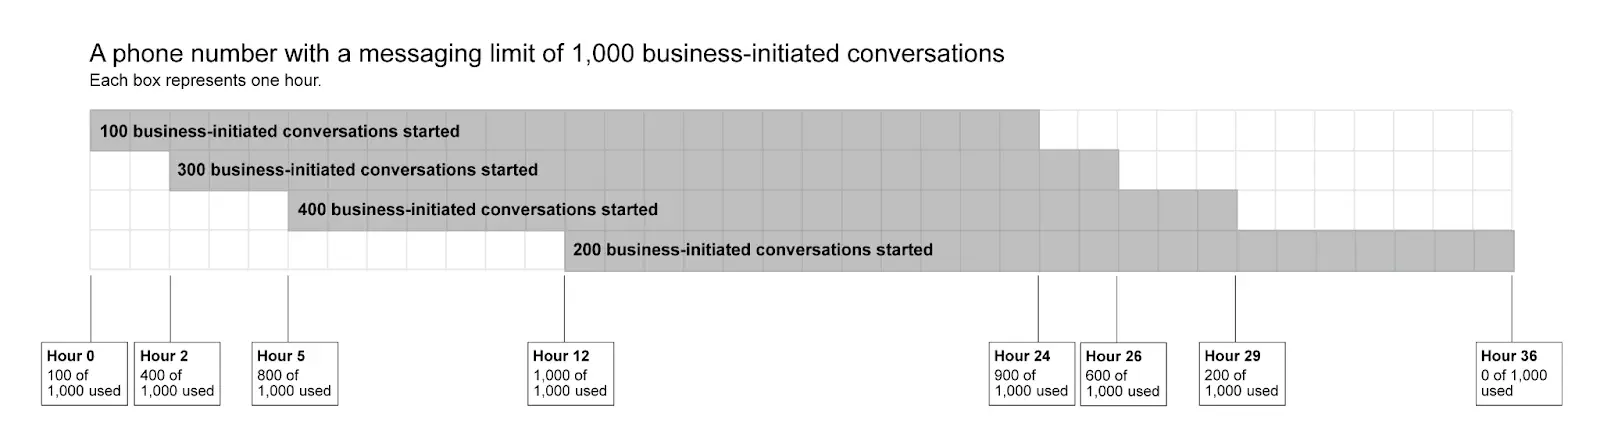 The number of business-initiated conversations allowed at each tier.